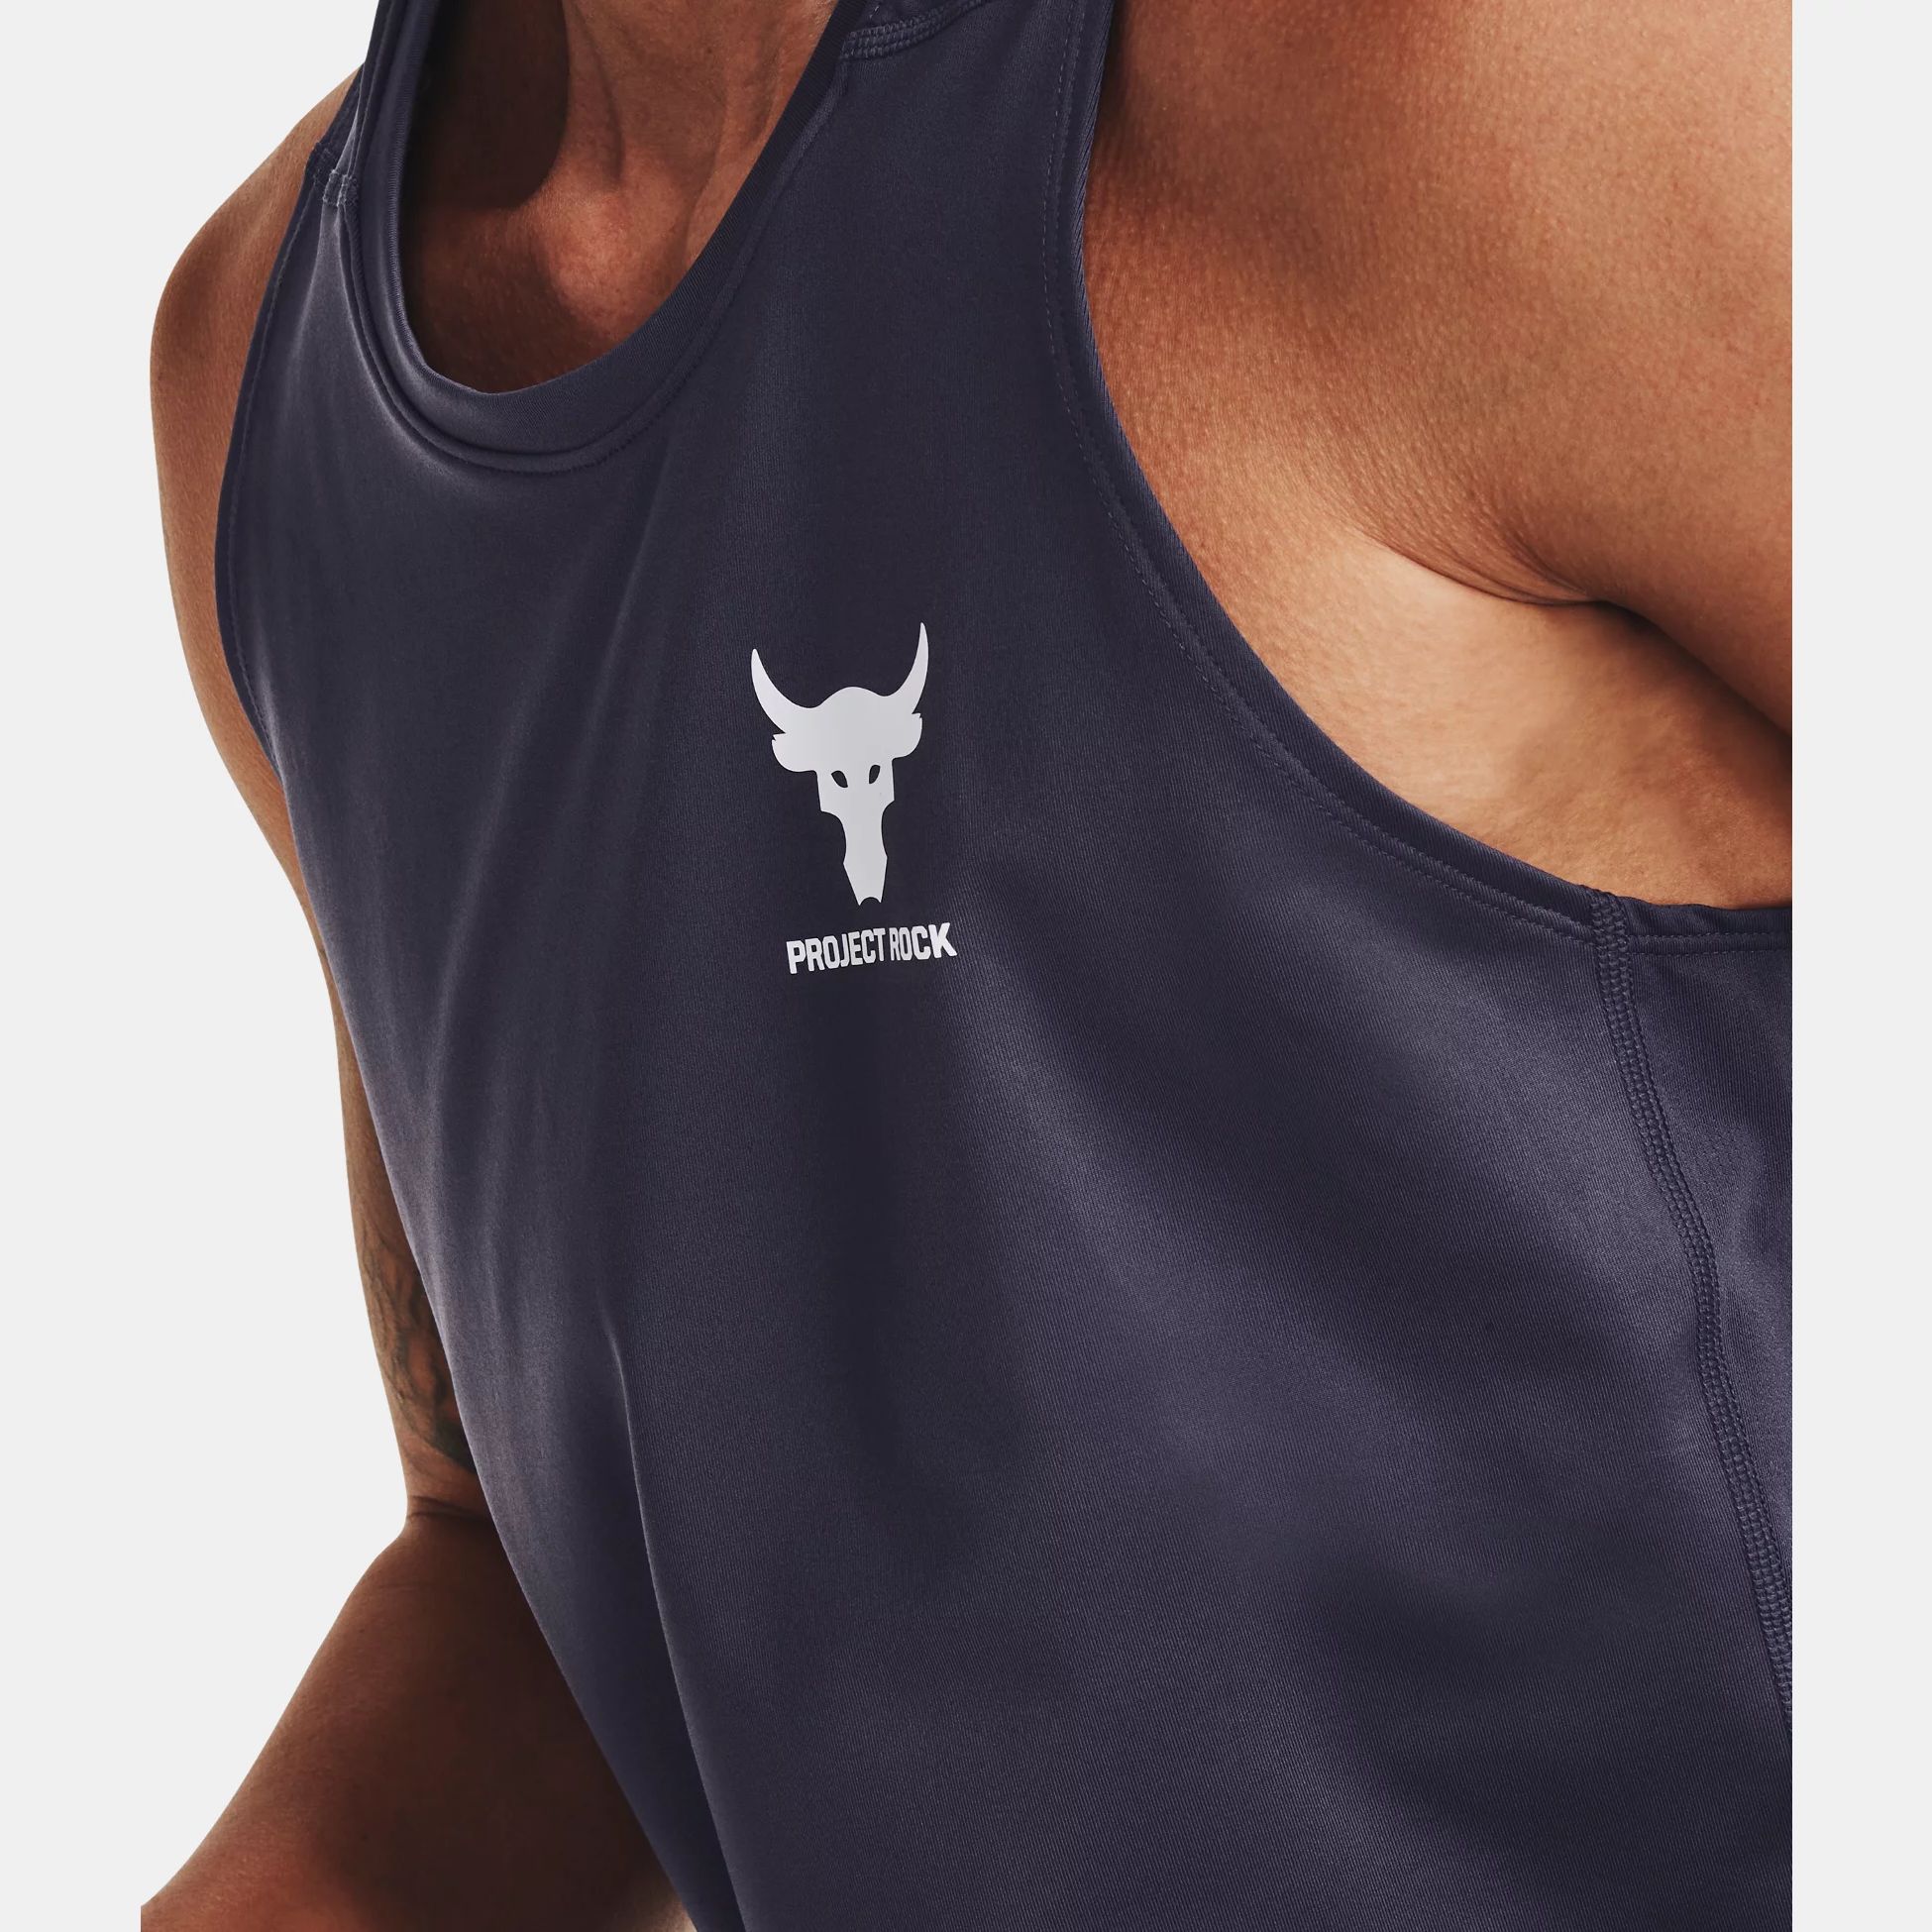 Tank Tops -  under armour Project Rock ArmourPrint Fitted Tank